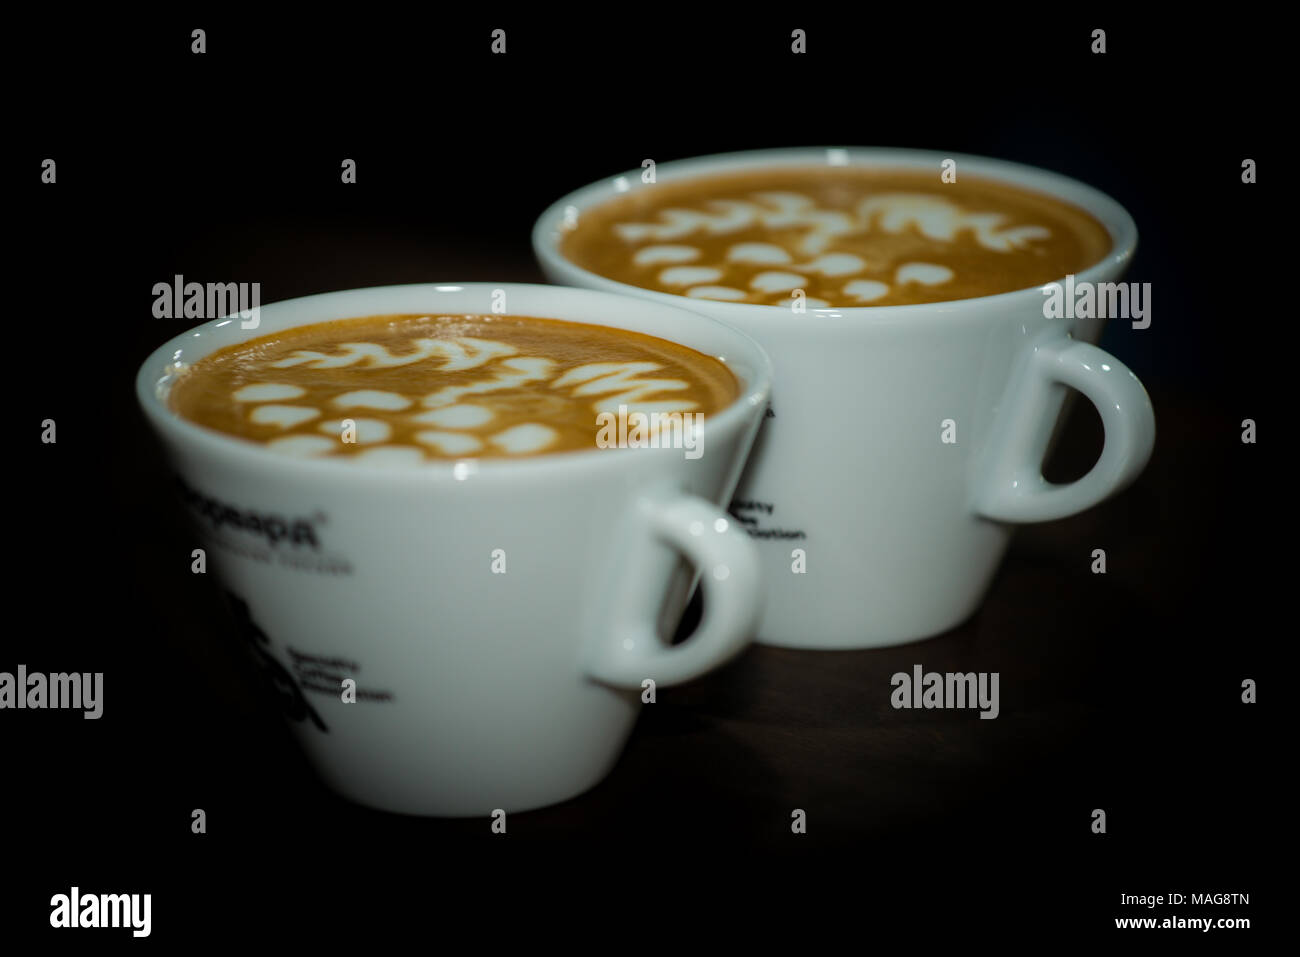 Cups of coffee and steamed milk drink, with latte-art pictures at the surface Stock Photo